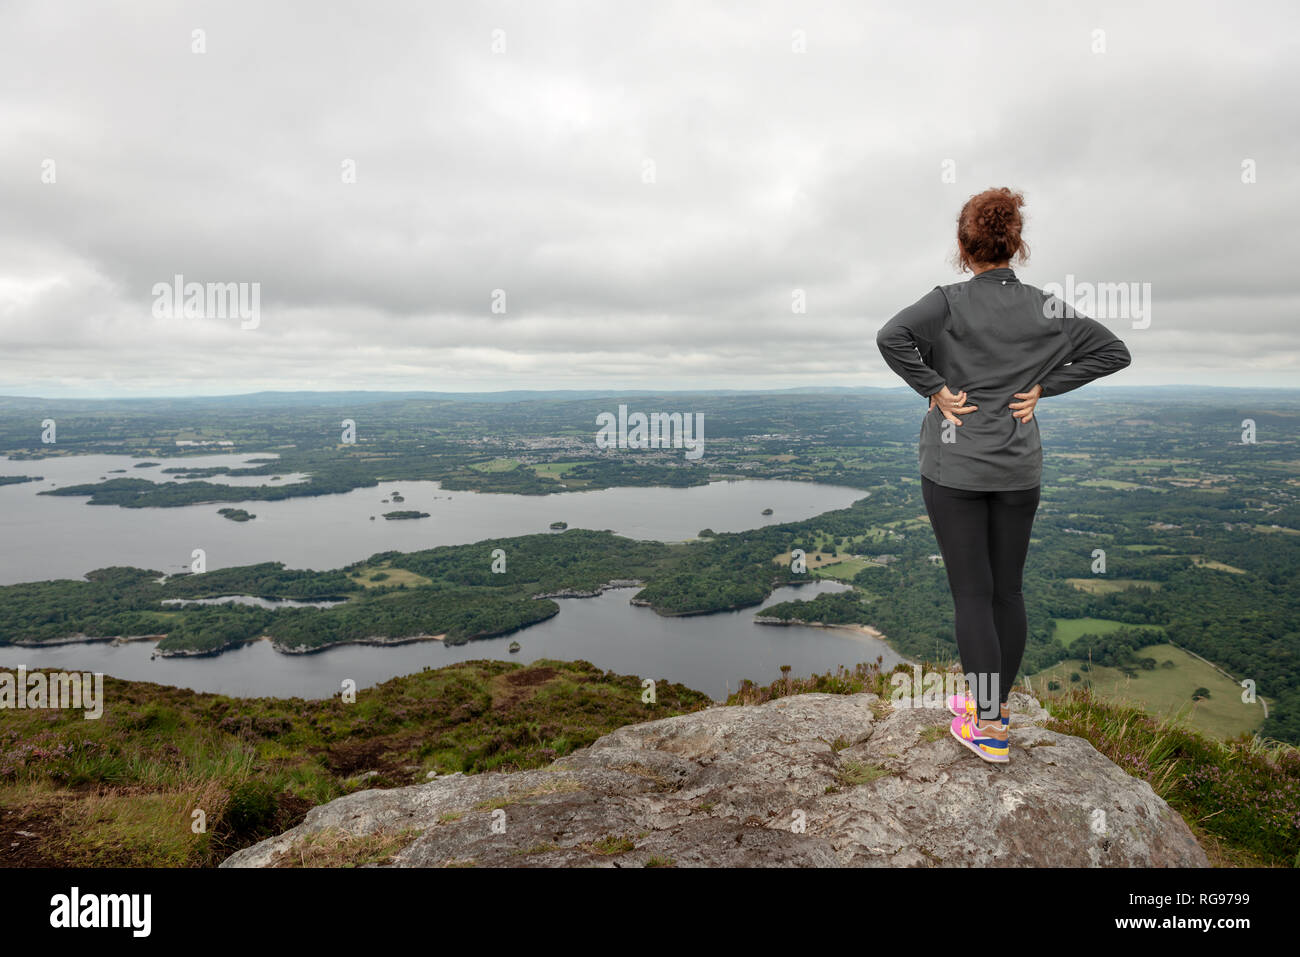 View to the Lakes of Killarney and Killarney Valley from Torc Mountain summit and a female hiker in Killarney National Park, County Kerry, Ireland Stock Photo